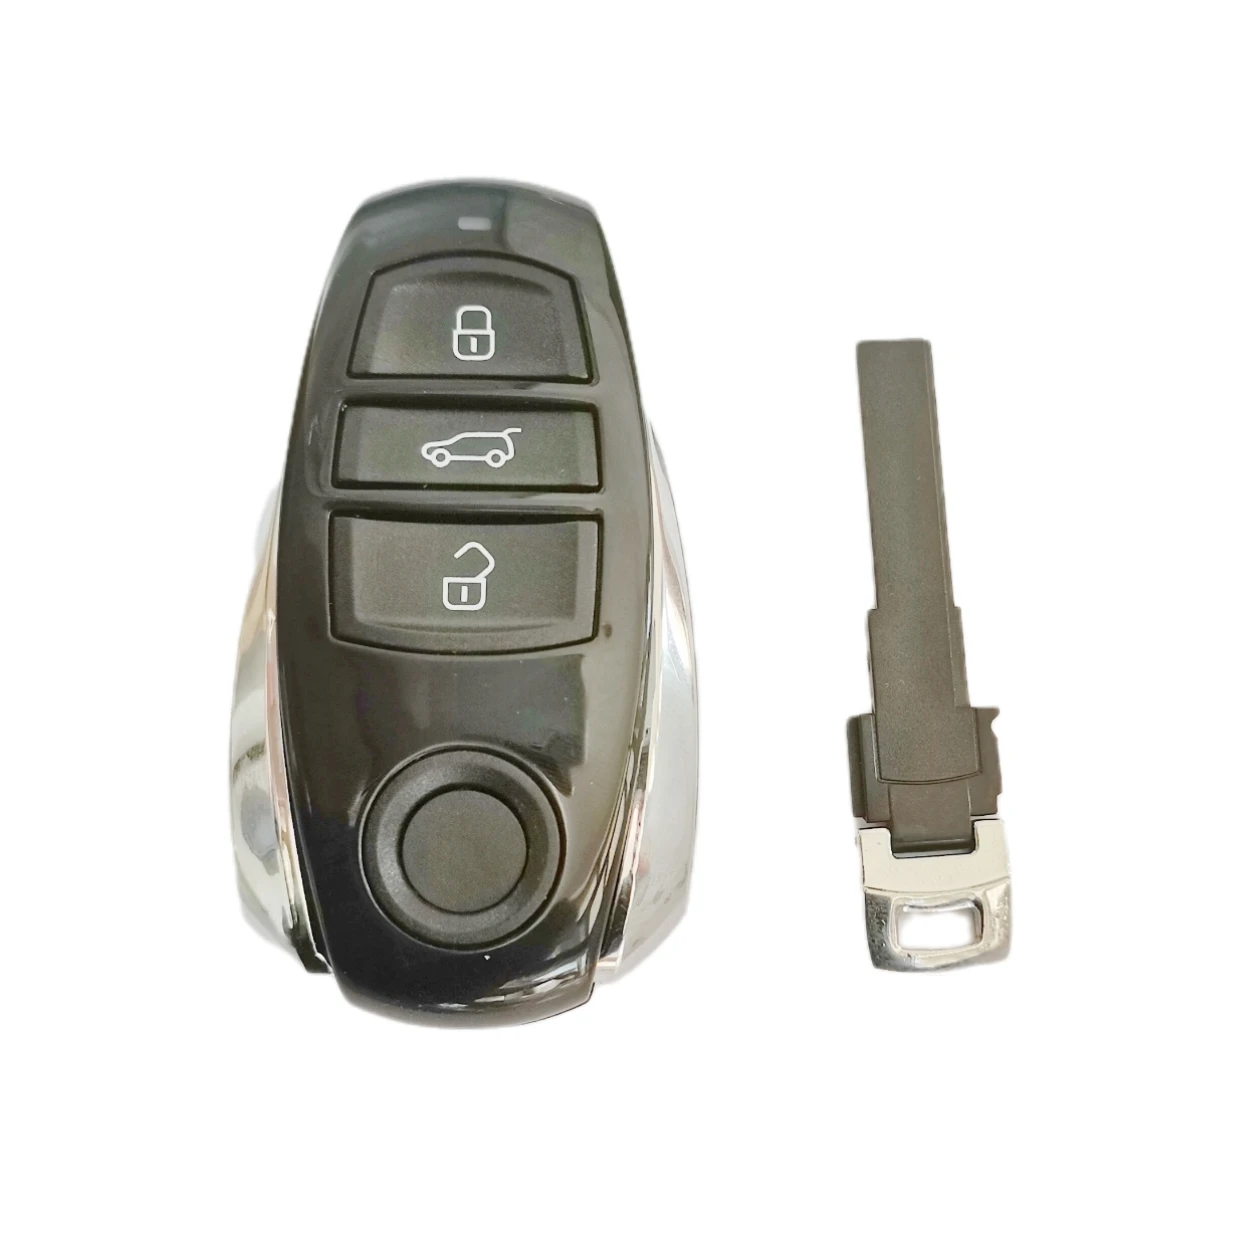 Smart Keyless Control Car Key Shell Case For Volkswagen VW Touareg 2011 2012 2013 2014 2015 2016 Replacement Remote Fob